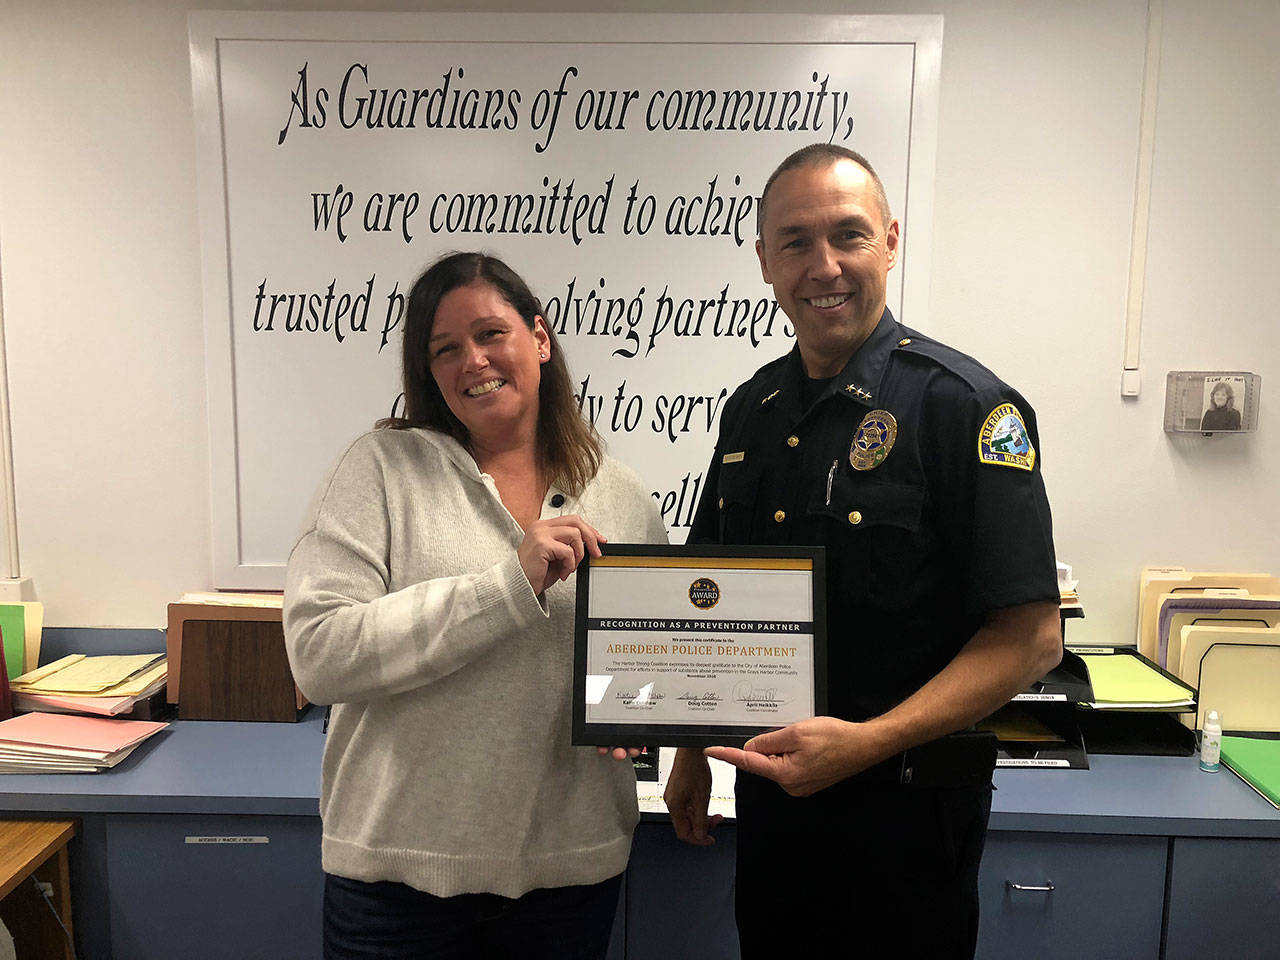 (Courtesy April Heikkila | Grays Harbor News Group) Sarah Oleachea, a member of the Harbor Strong coalition and an Aberdeen High School student parent, presents Aberdeen Police Chief Steve Shumate a certificate of appreciation for efforts to reduce unused prescription medications in Aberdeen.